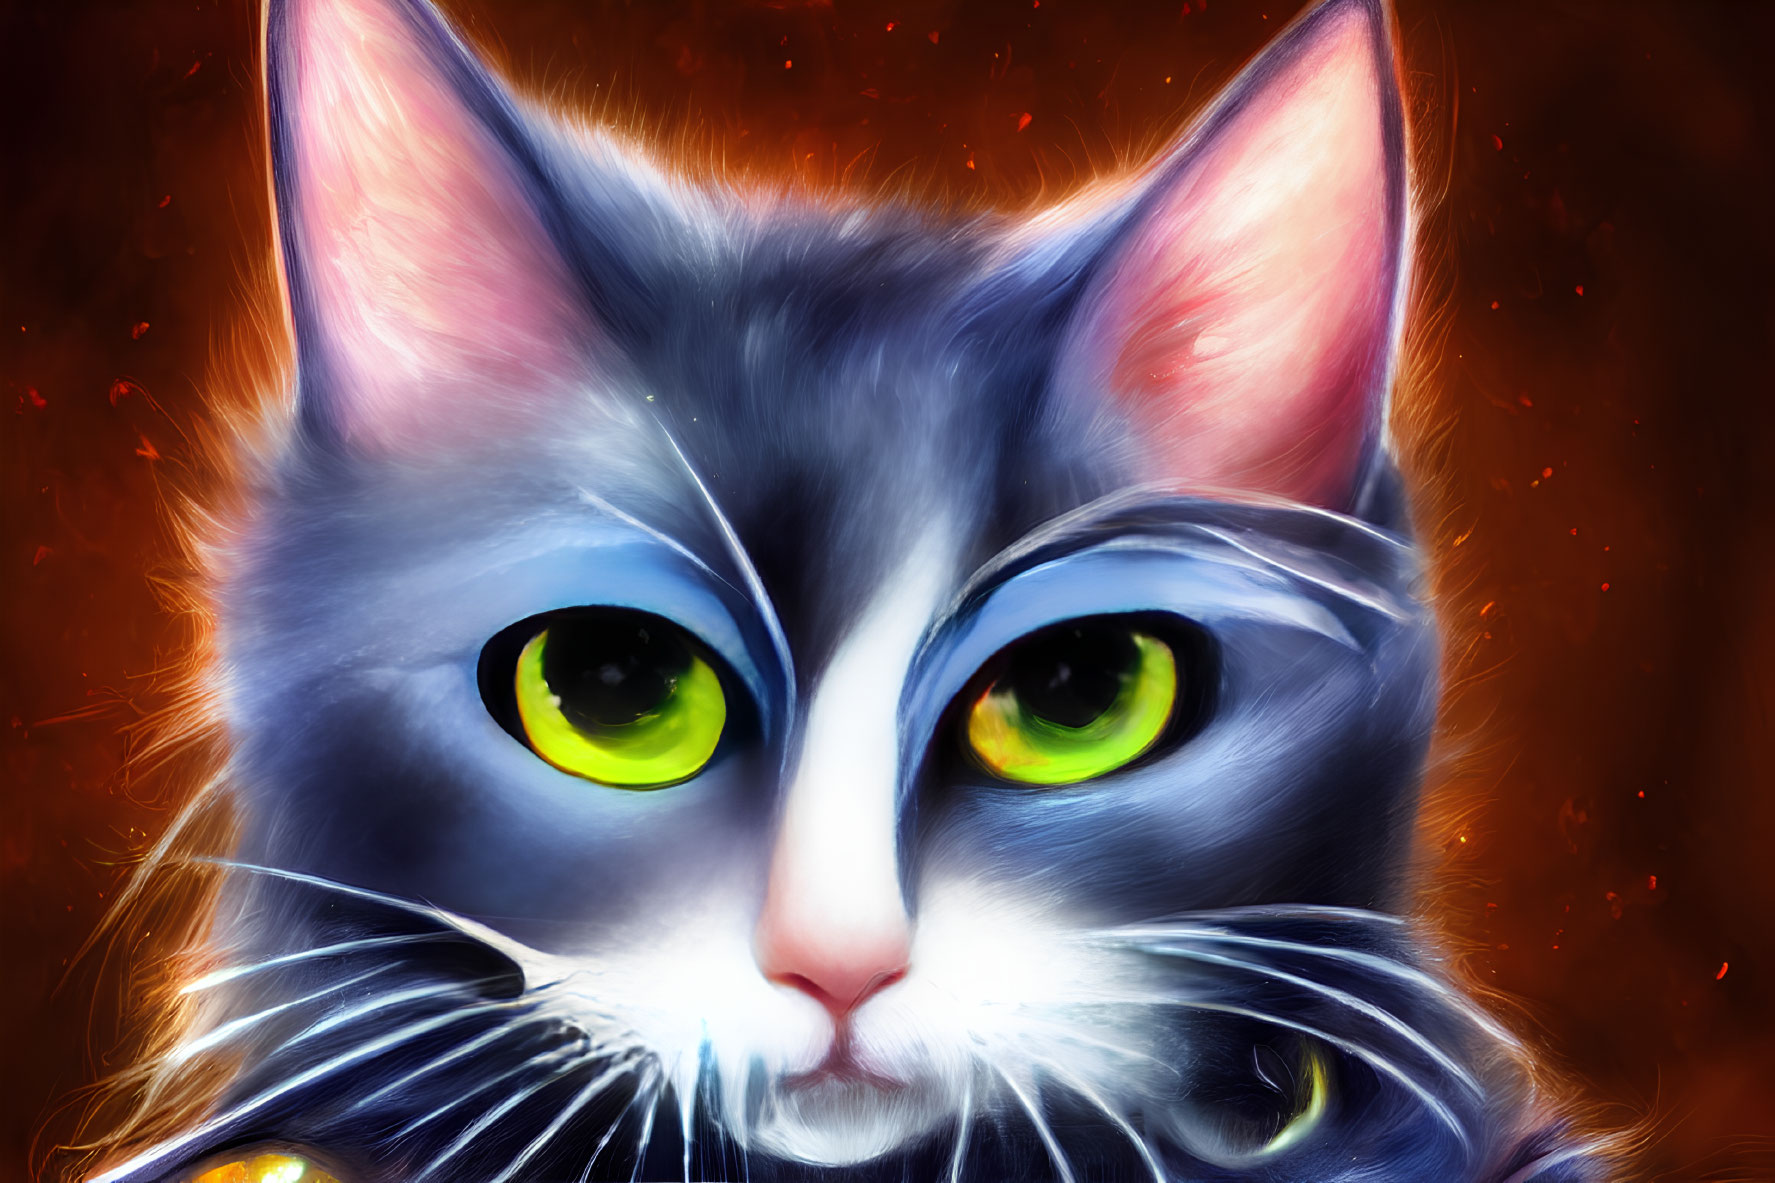 Detailed digital painting of a cat with green eyes and grey fur on warm red and orange backdrop